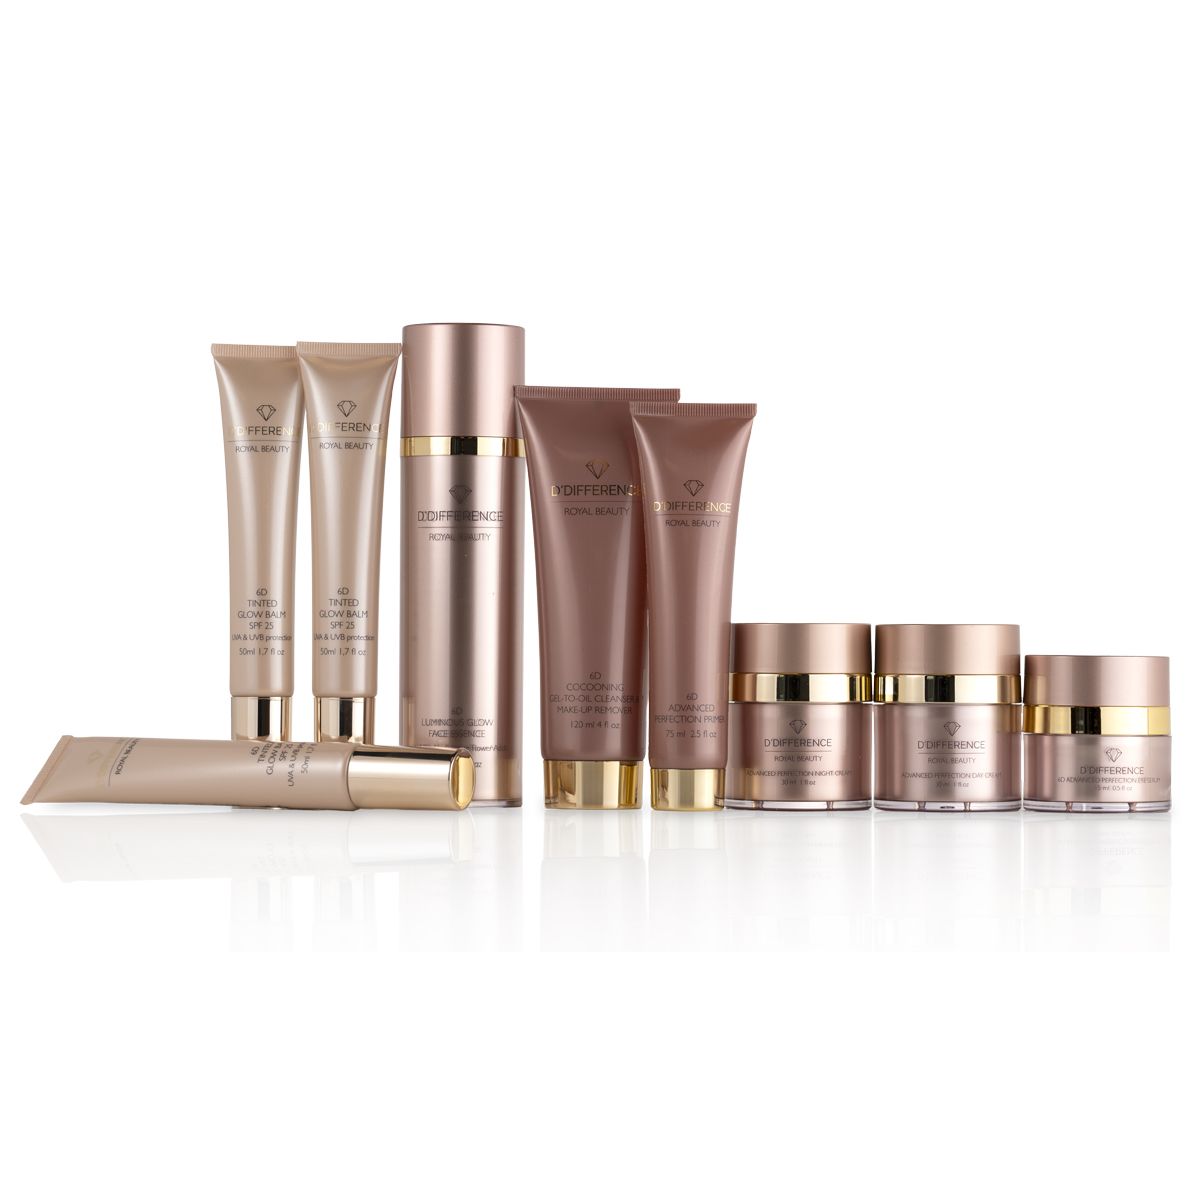 Set of 9 different 6D Royal Beauty premium skincare products from DDIFFERENCE on a white background featuring BB creams, recyclable tubes of cleansing oils, primer, day and night creams. 